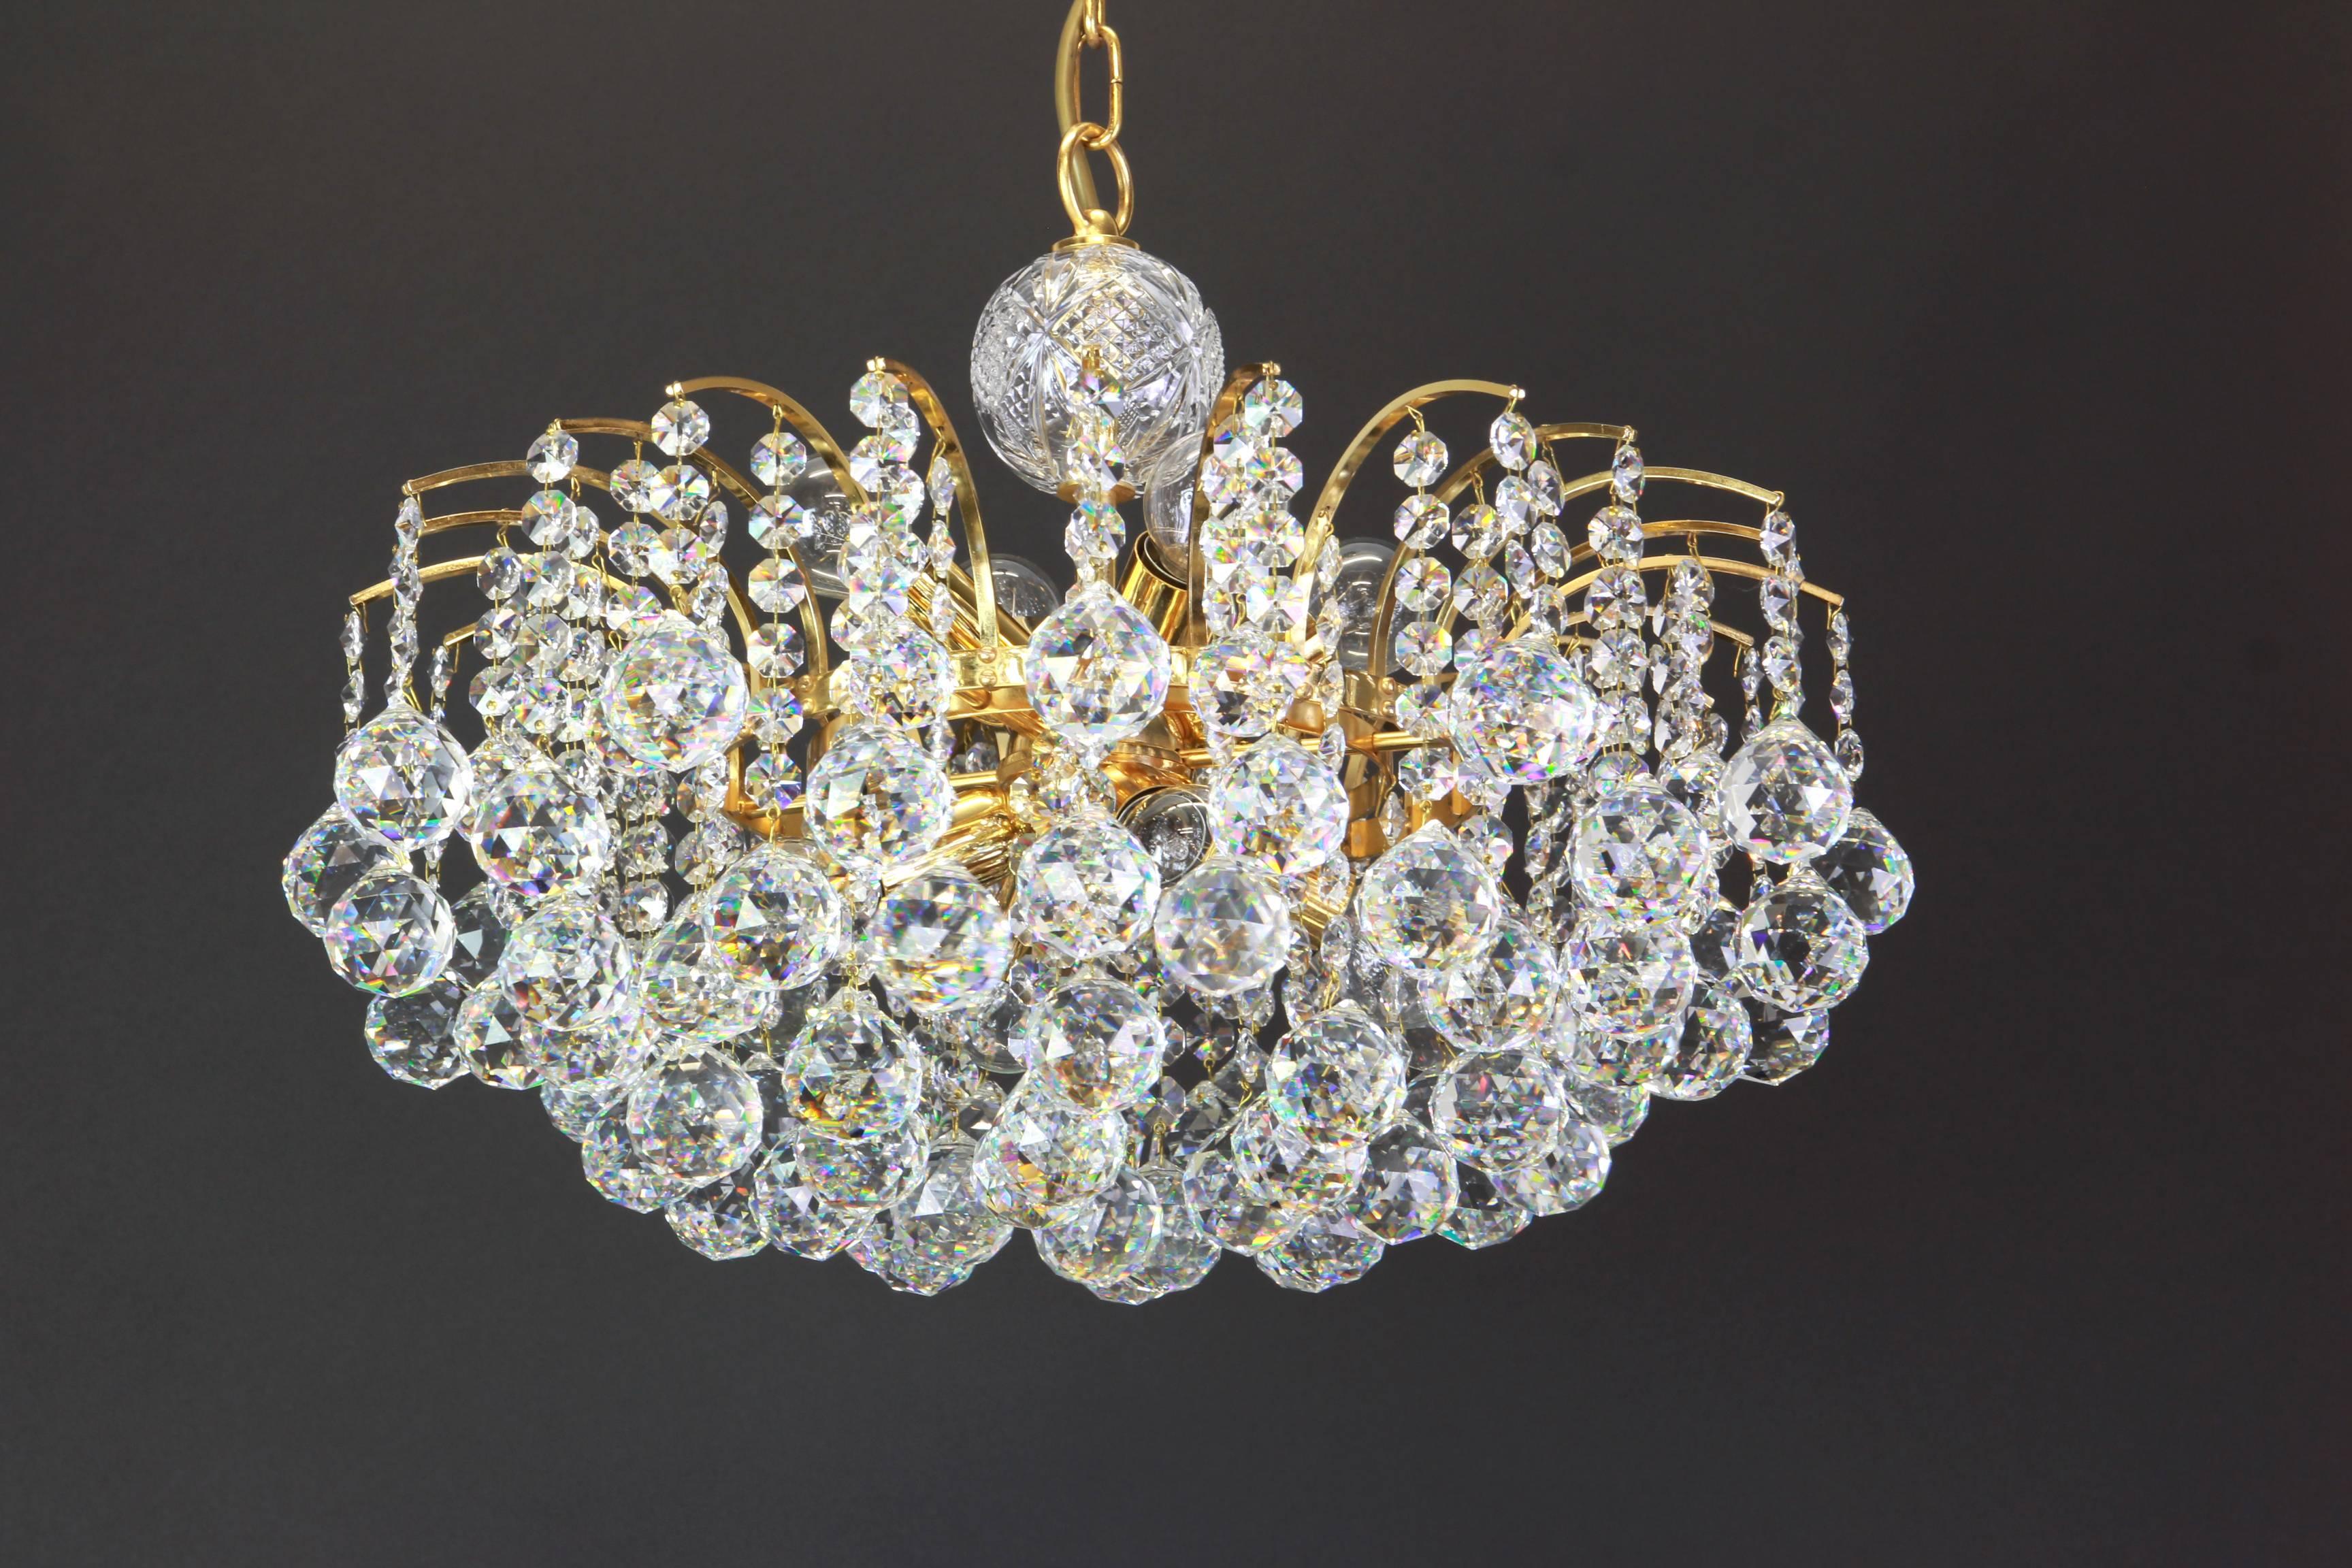 Elegant chandelier with wonderful crystal balls on a brass base, suspended from tiny hooks.
From: Christoph Palme, Germany, circa 1970s. 

High quality and in very good condition. Cleaned, well-wired and ready to use. 

The fixture requires 8 x